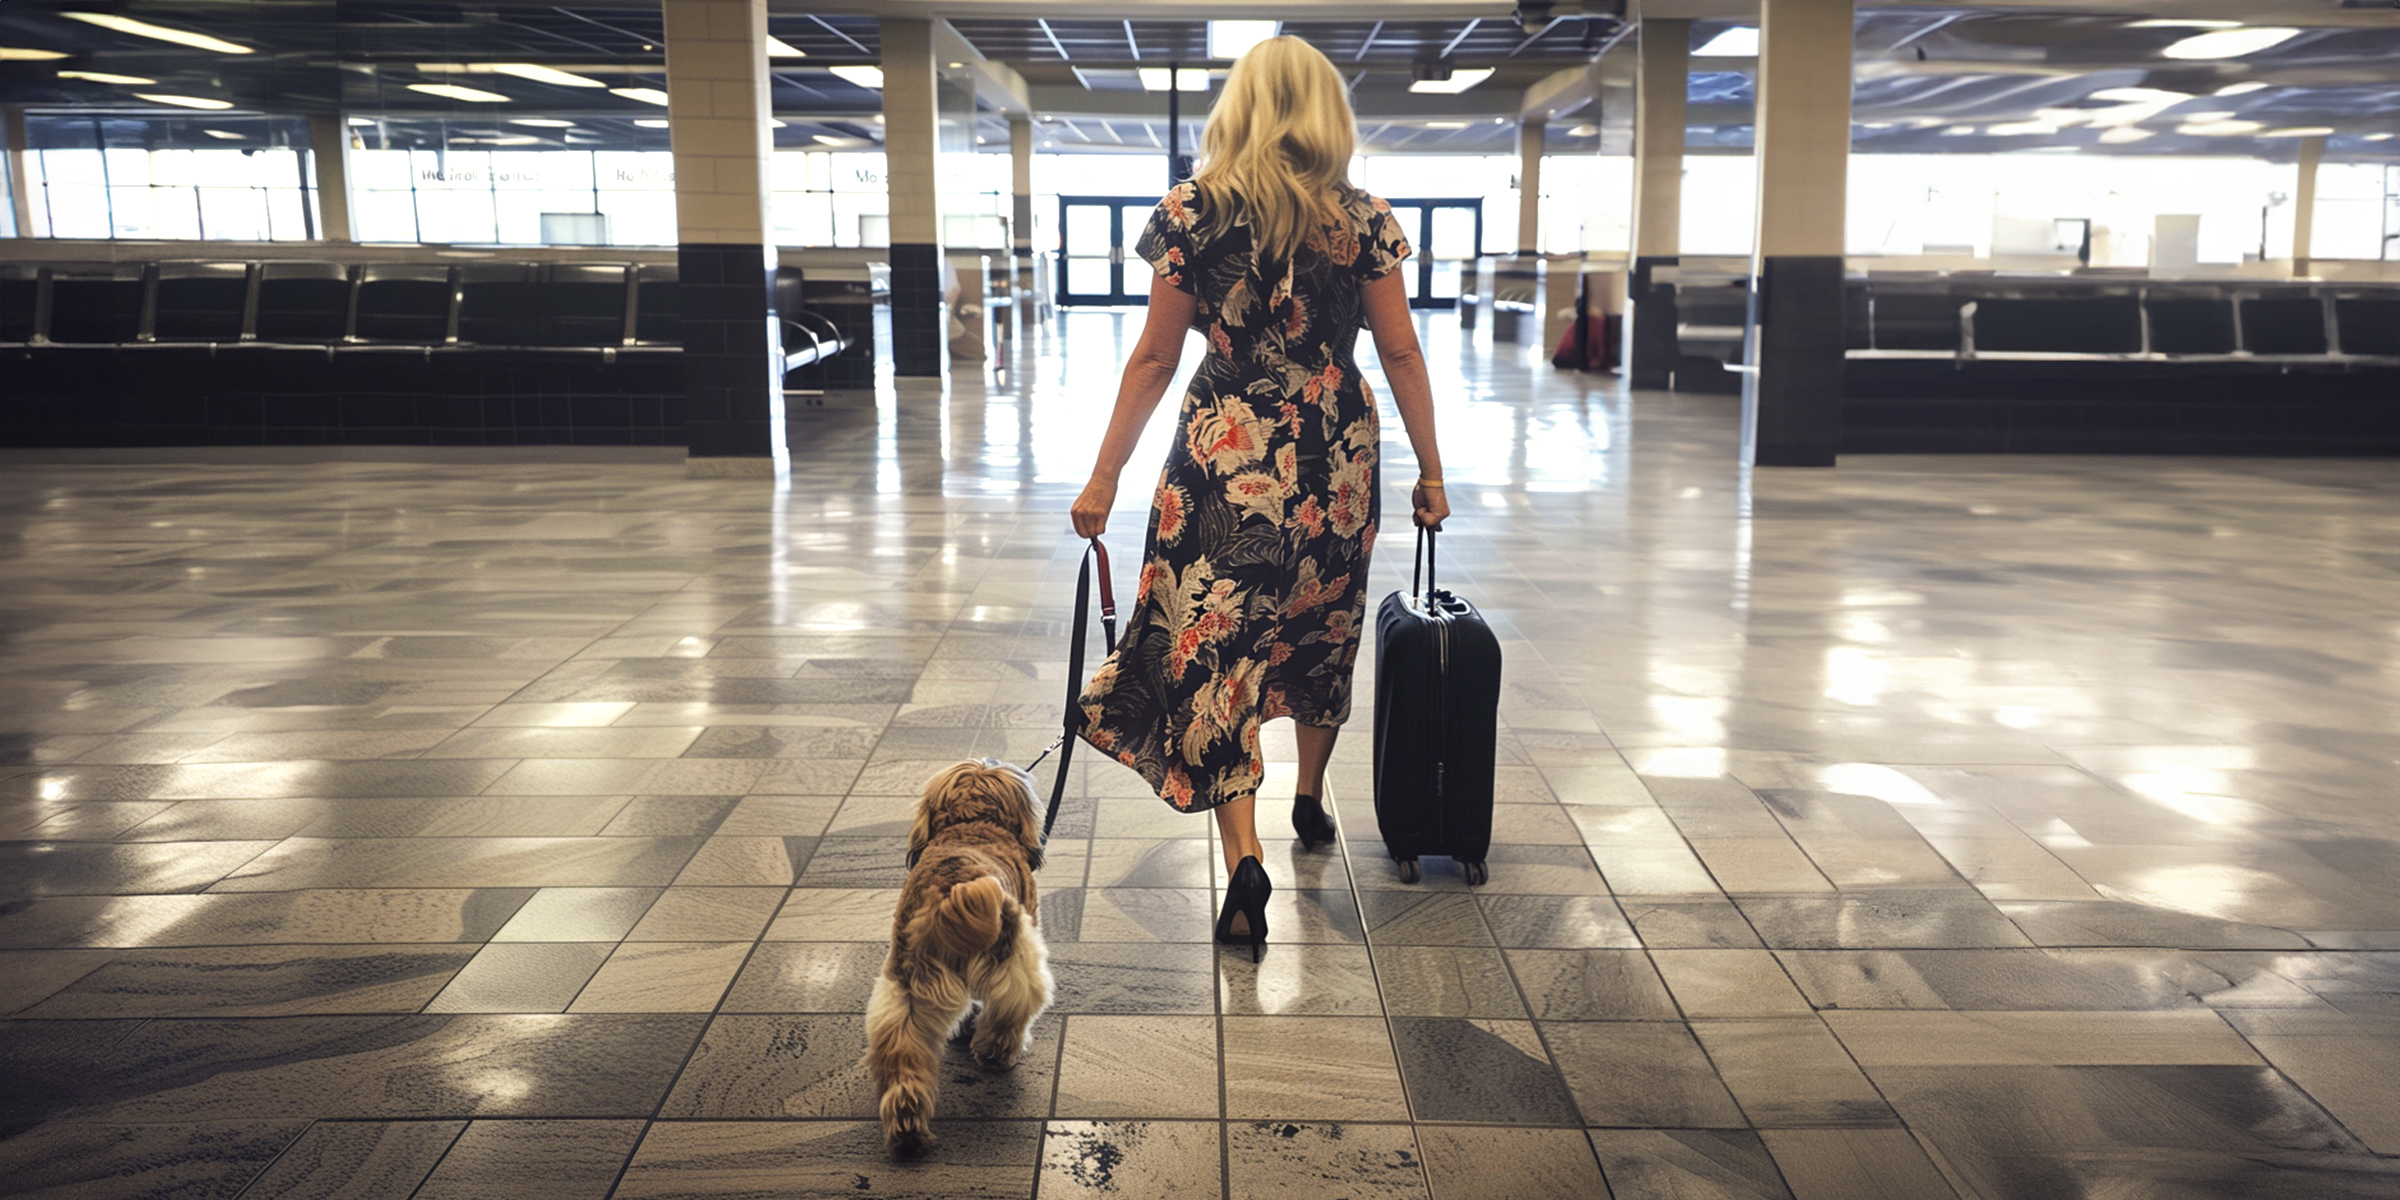 A woman leading a dog through an airport terminal | Source: Amomama